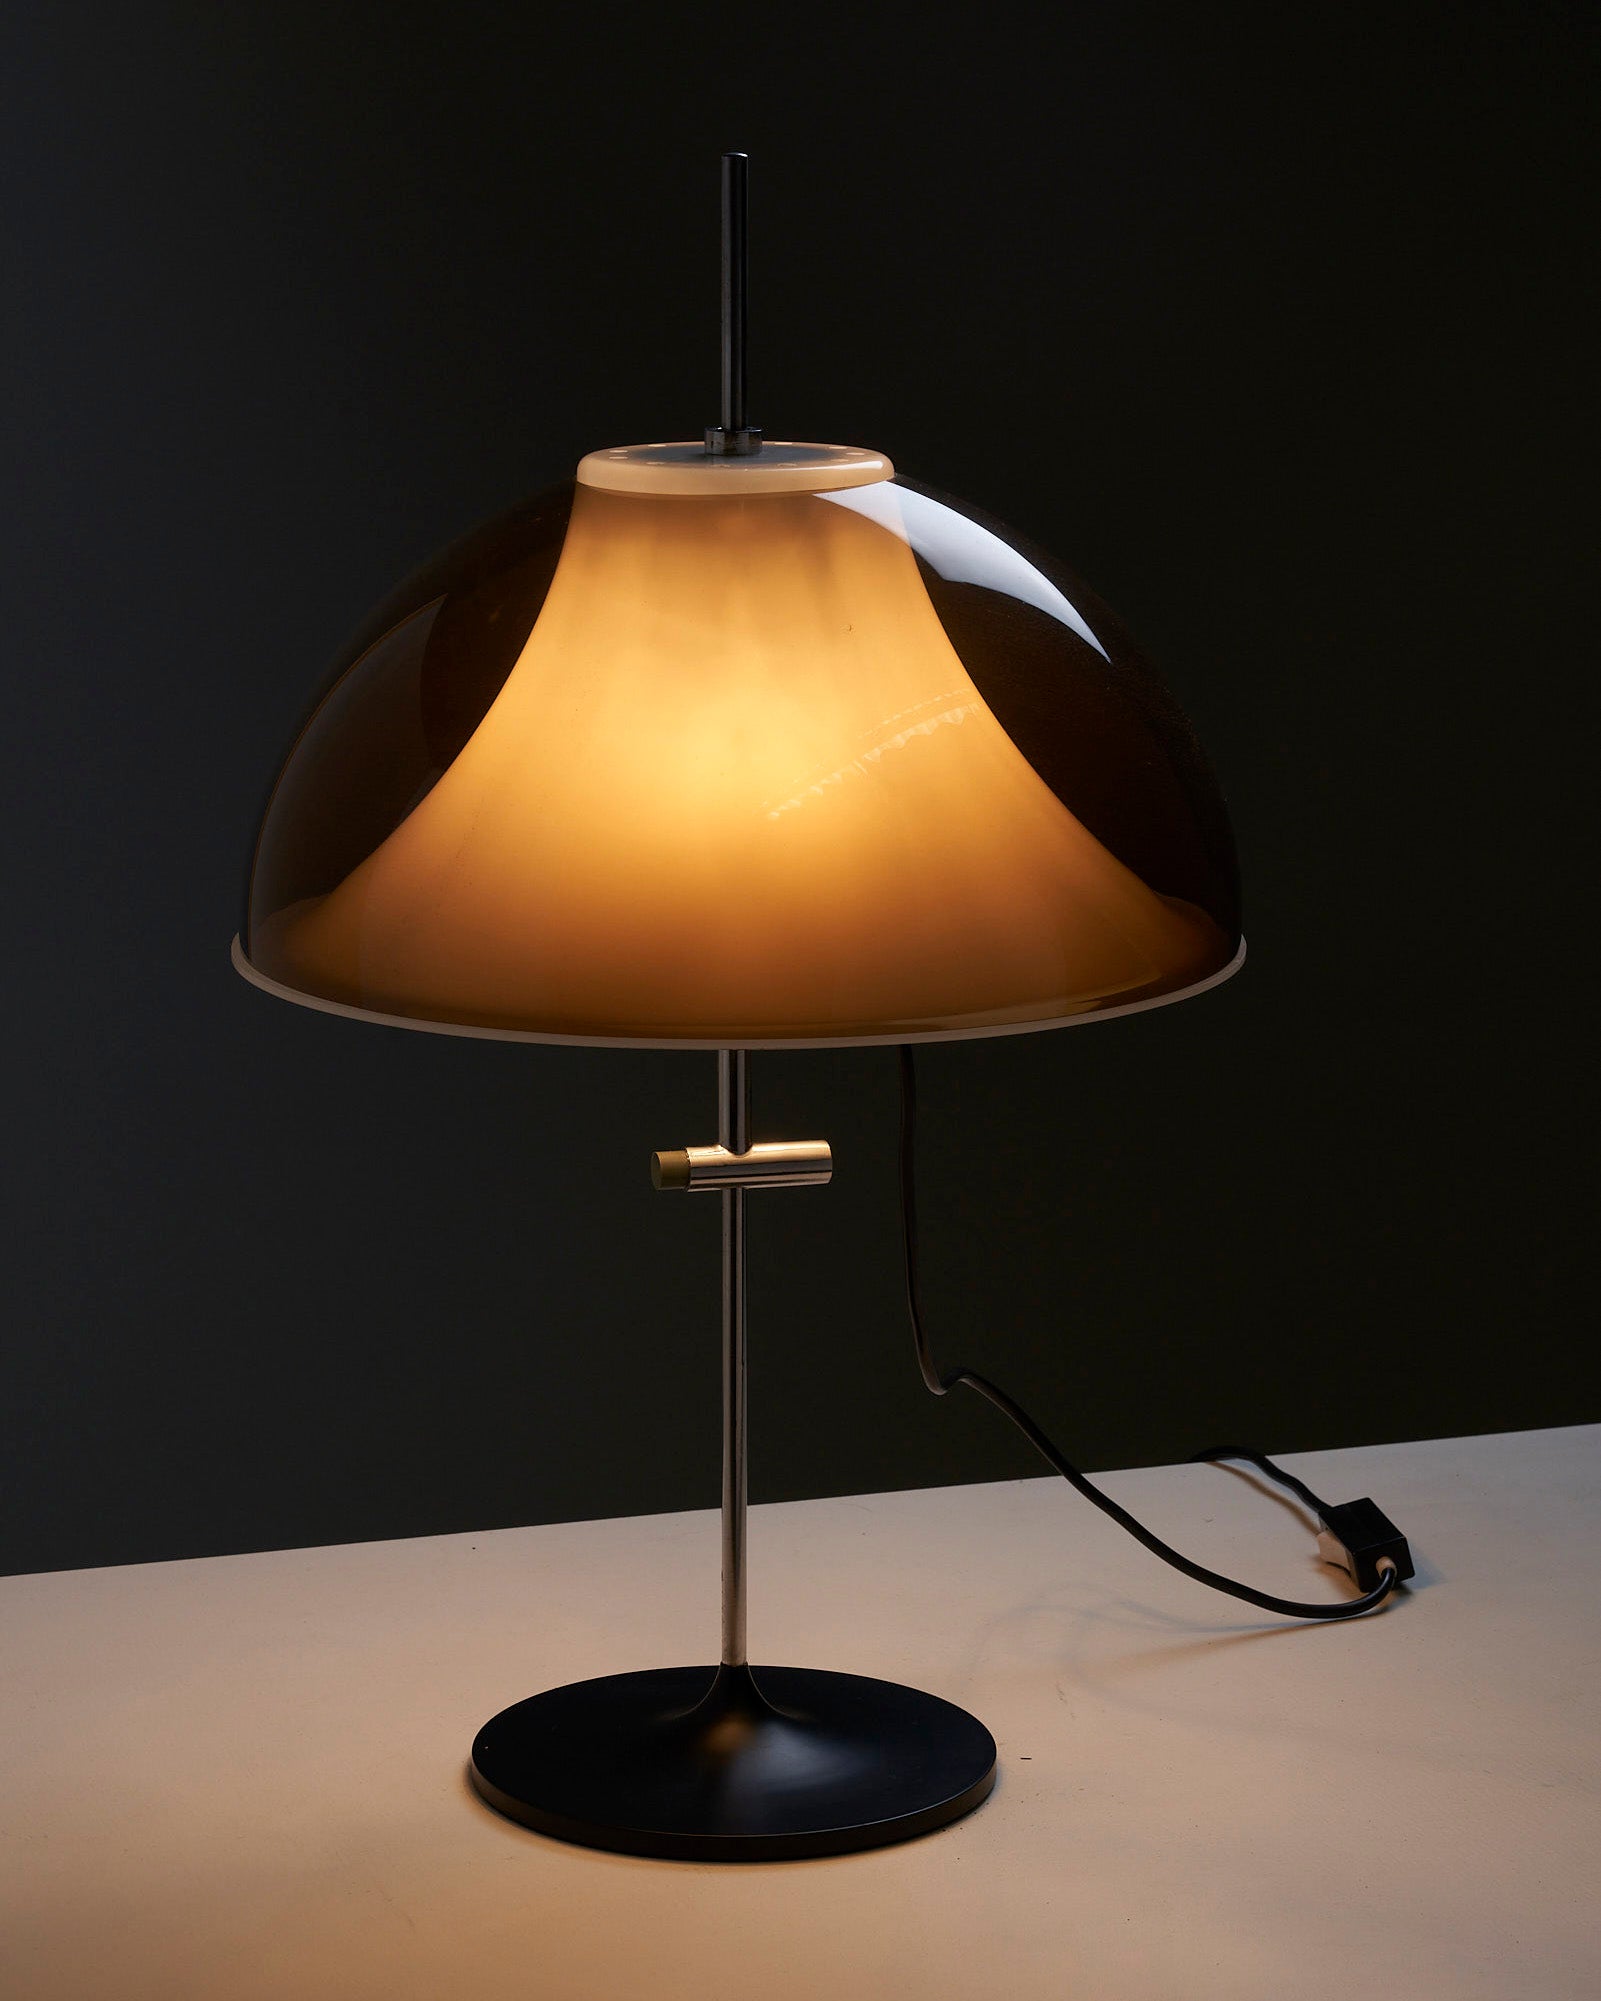 Space Age Mushroom Table Lamp by Elio Martinelli for the brand Artimeta